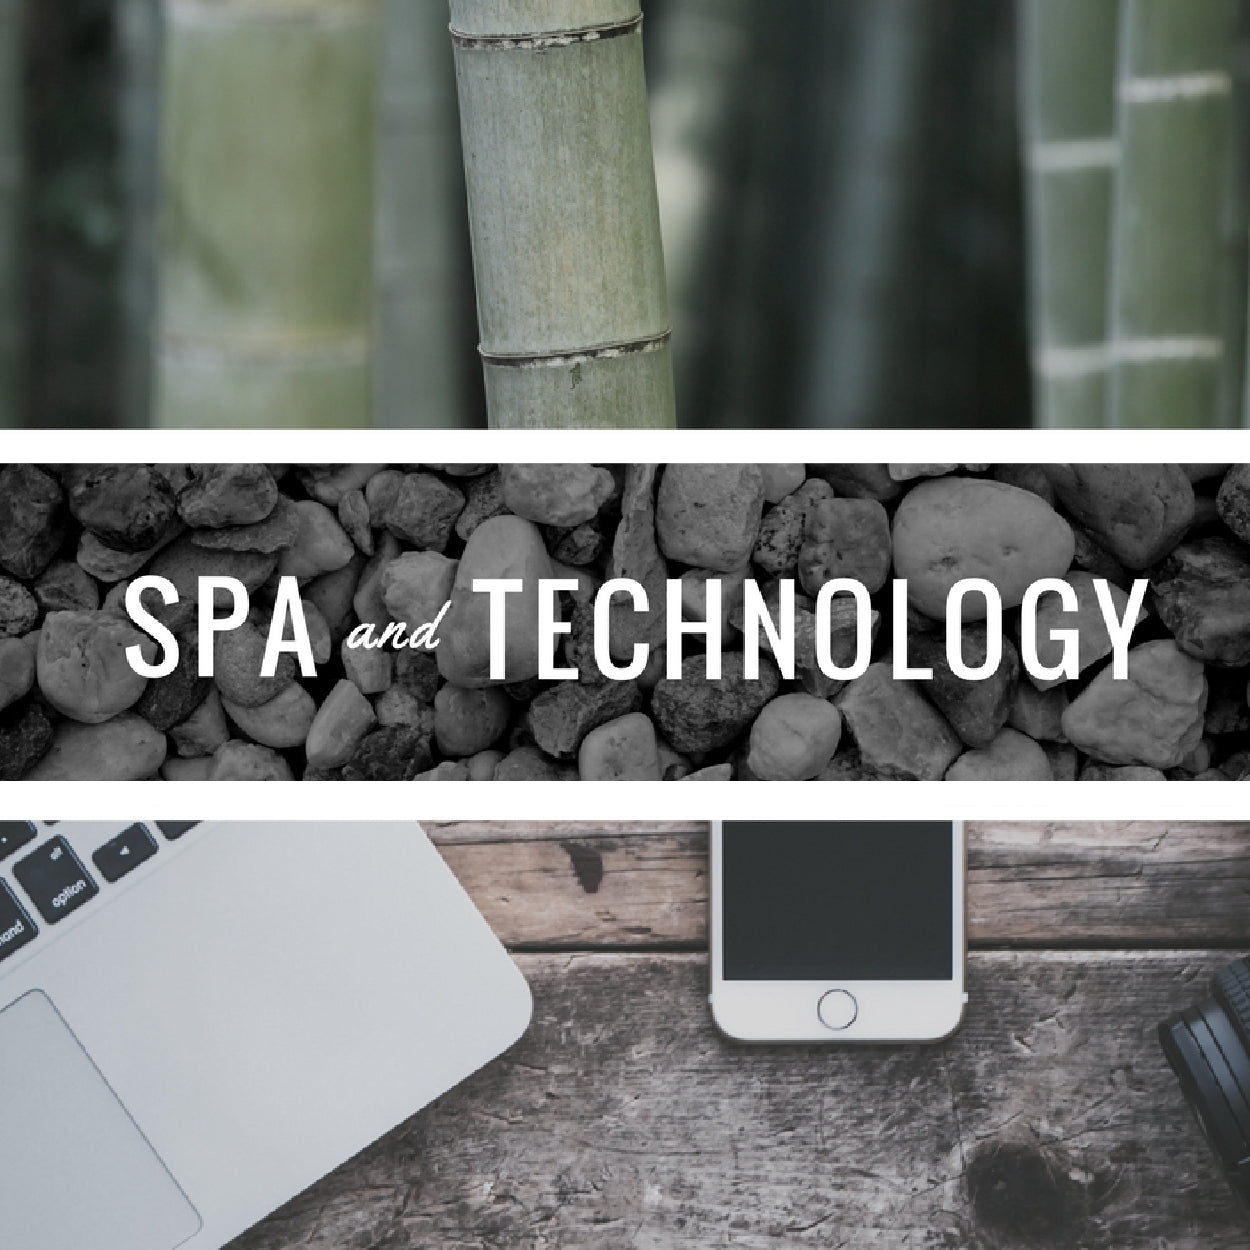 Social Media & Technology Are Changing the Spa World